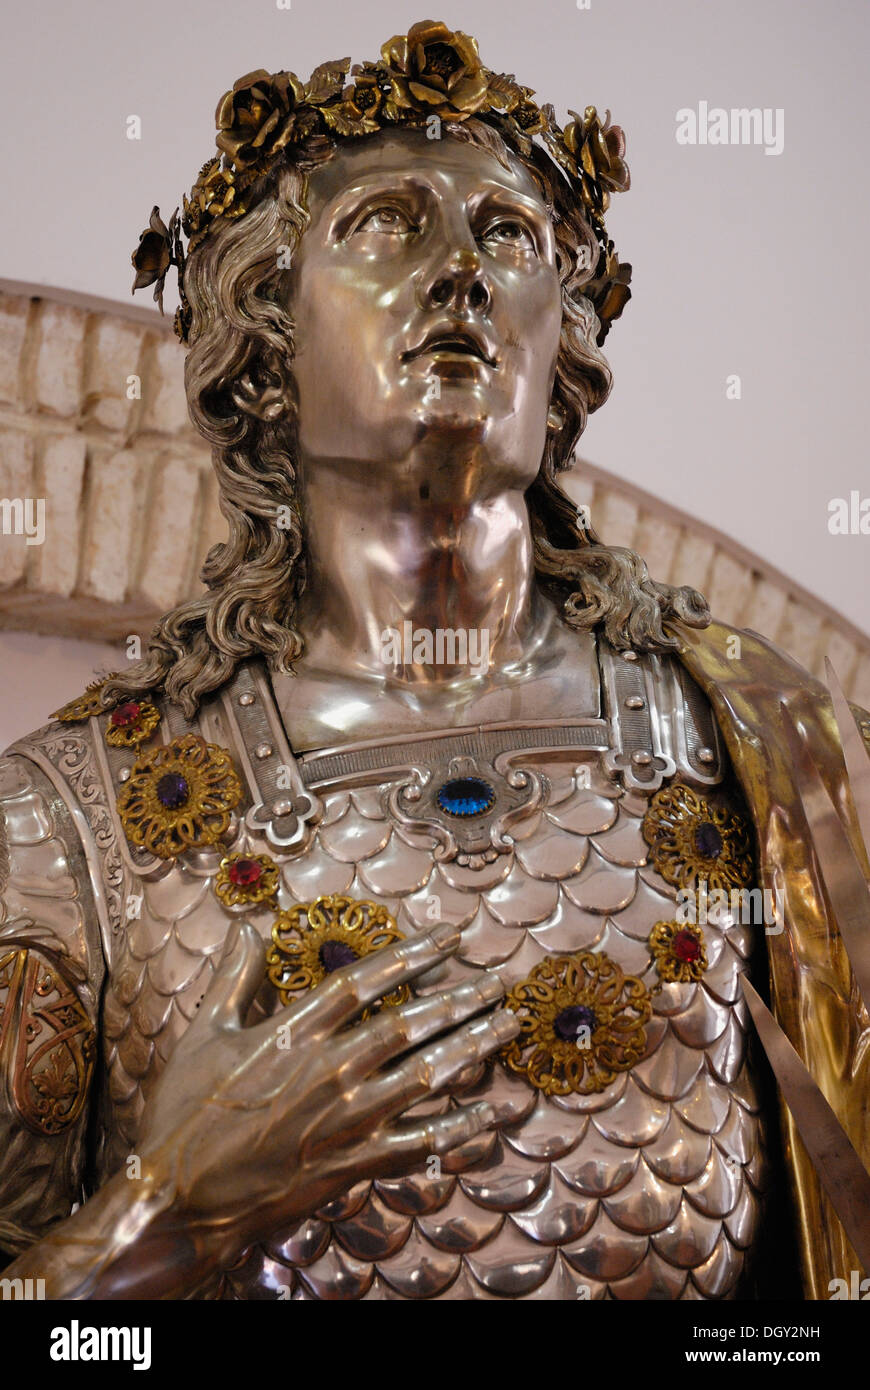 Silver statue of a Sicilian nobleman with precious stones, Museo Statale, Mileto Calabria, Italy, Europe Stock Photo